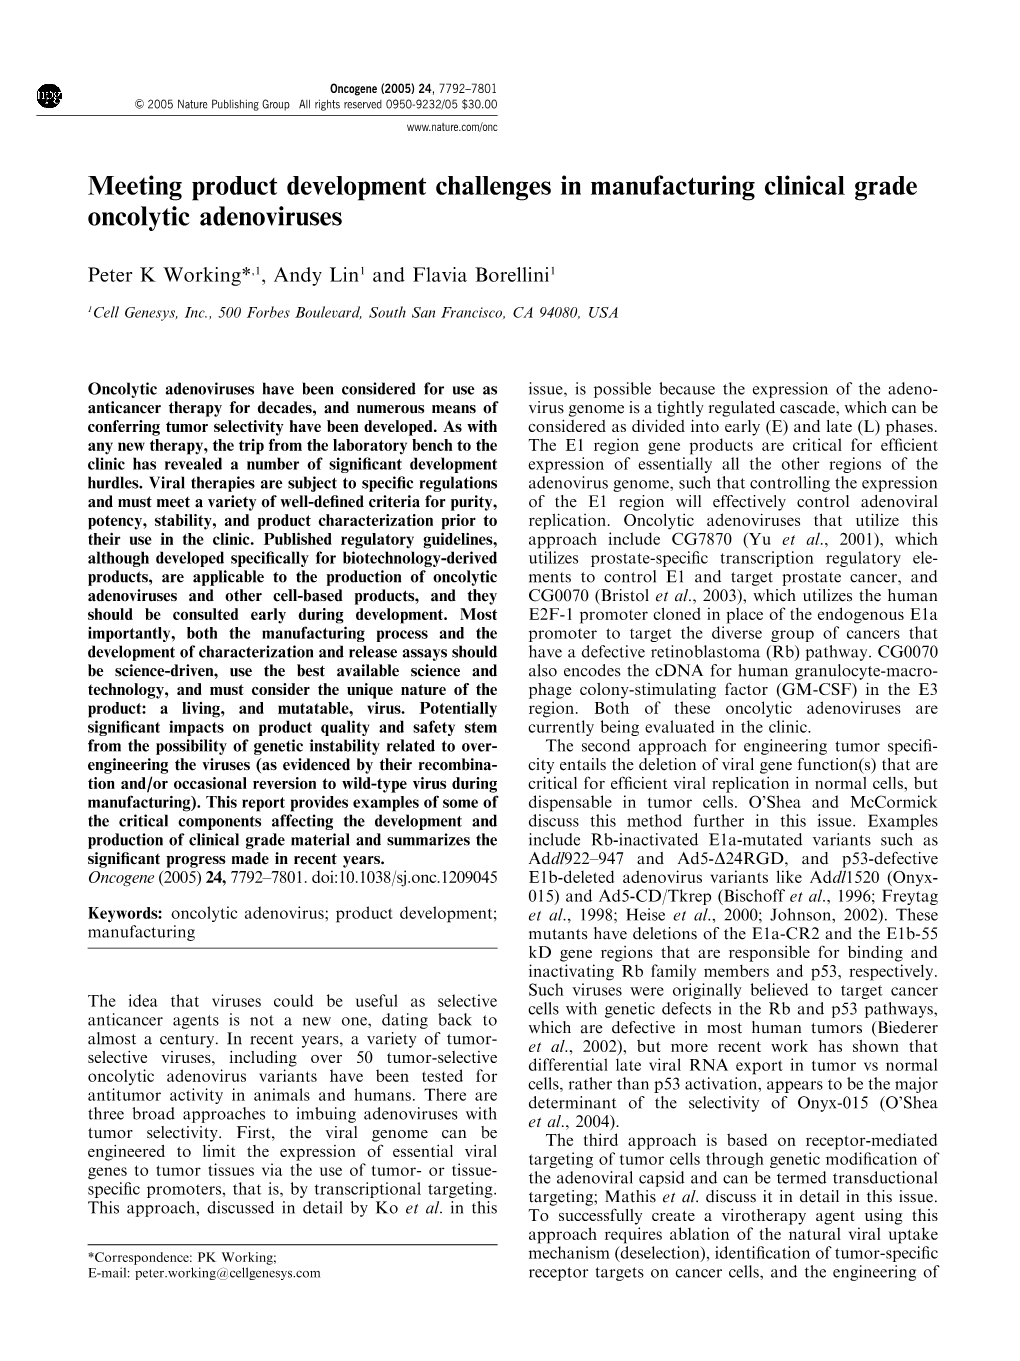 Meeting Product Development Challenges in Manufacturing Clinical Grade Oncolytic Adenoviruses